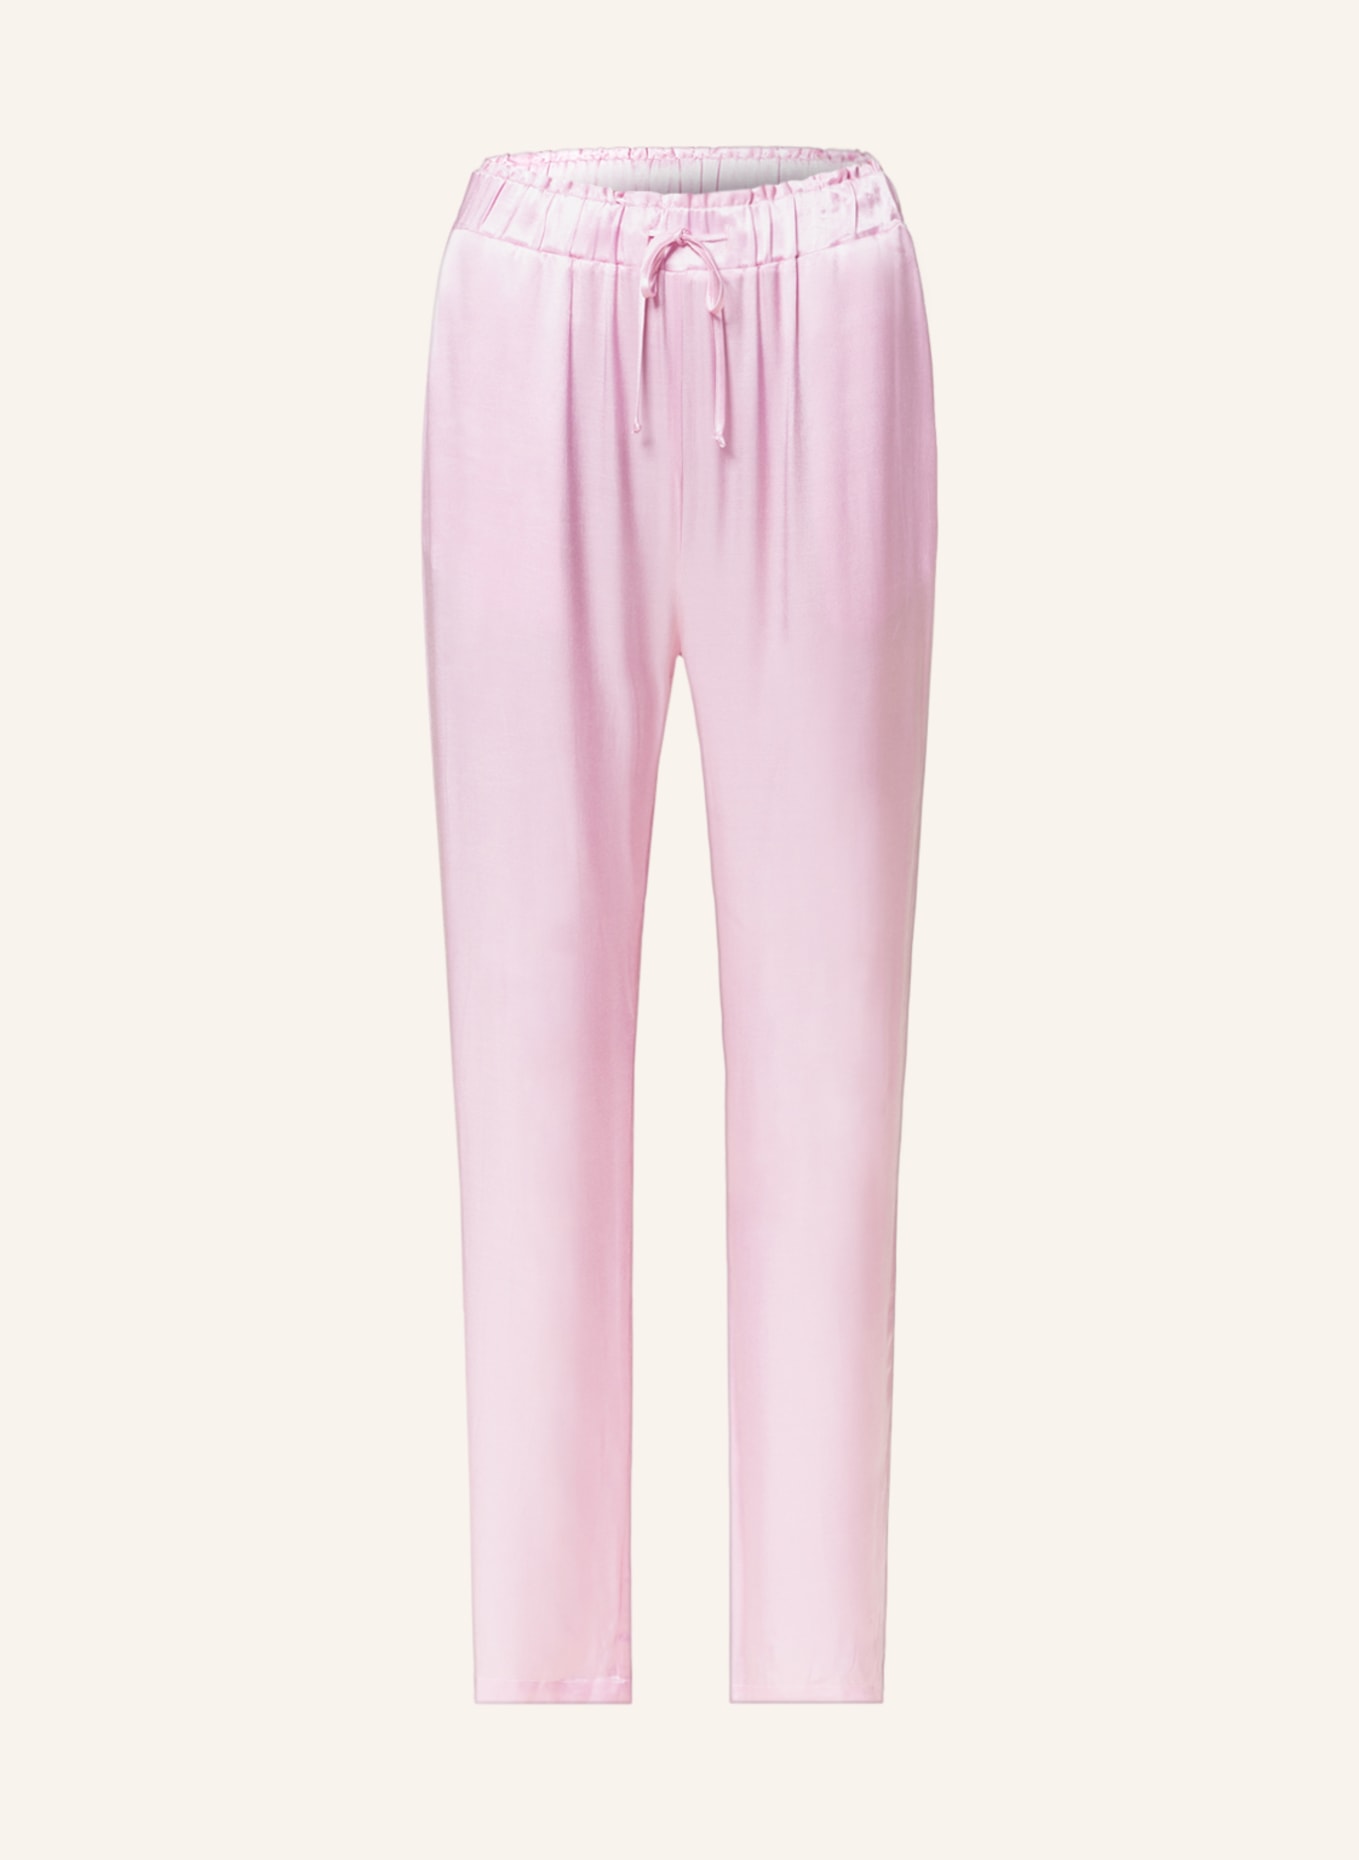 MRS & HUGS Satin trousers, Color: PINK (Image 1)